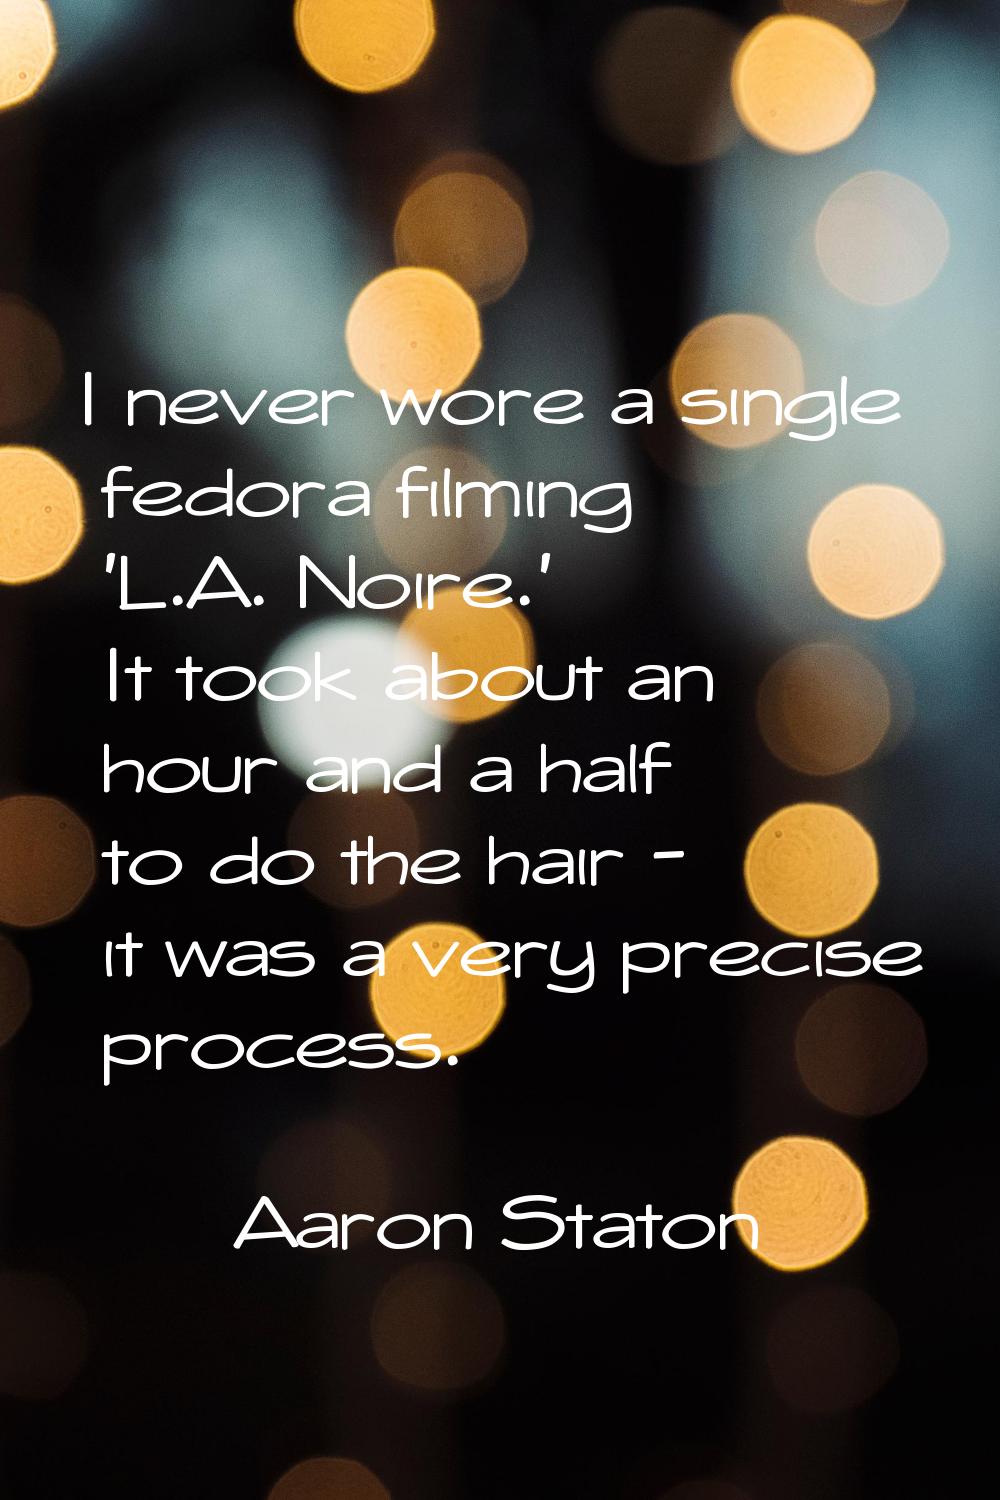 I never wore a single fedora filming 'L.A. Noire.' It took about an hour and a half to do the hair 